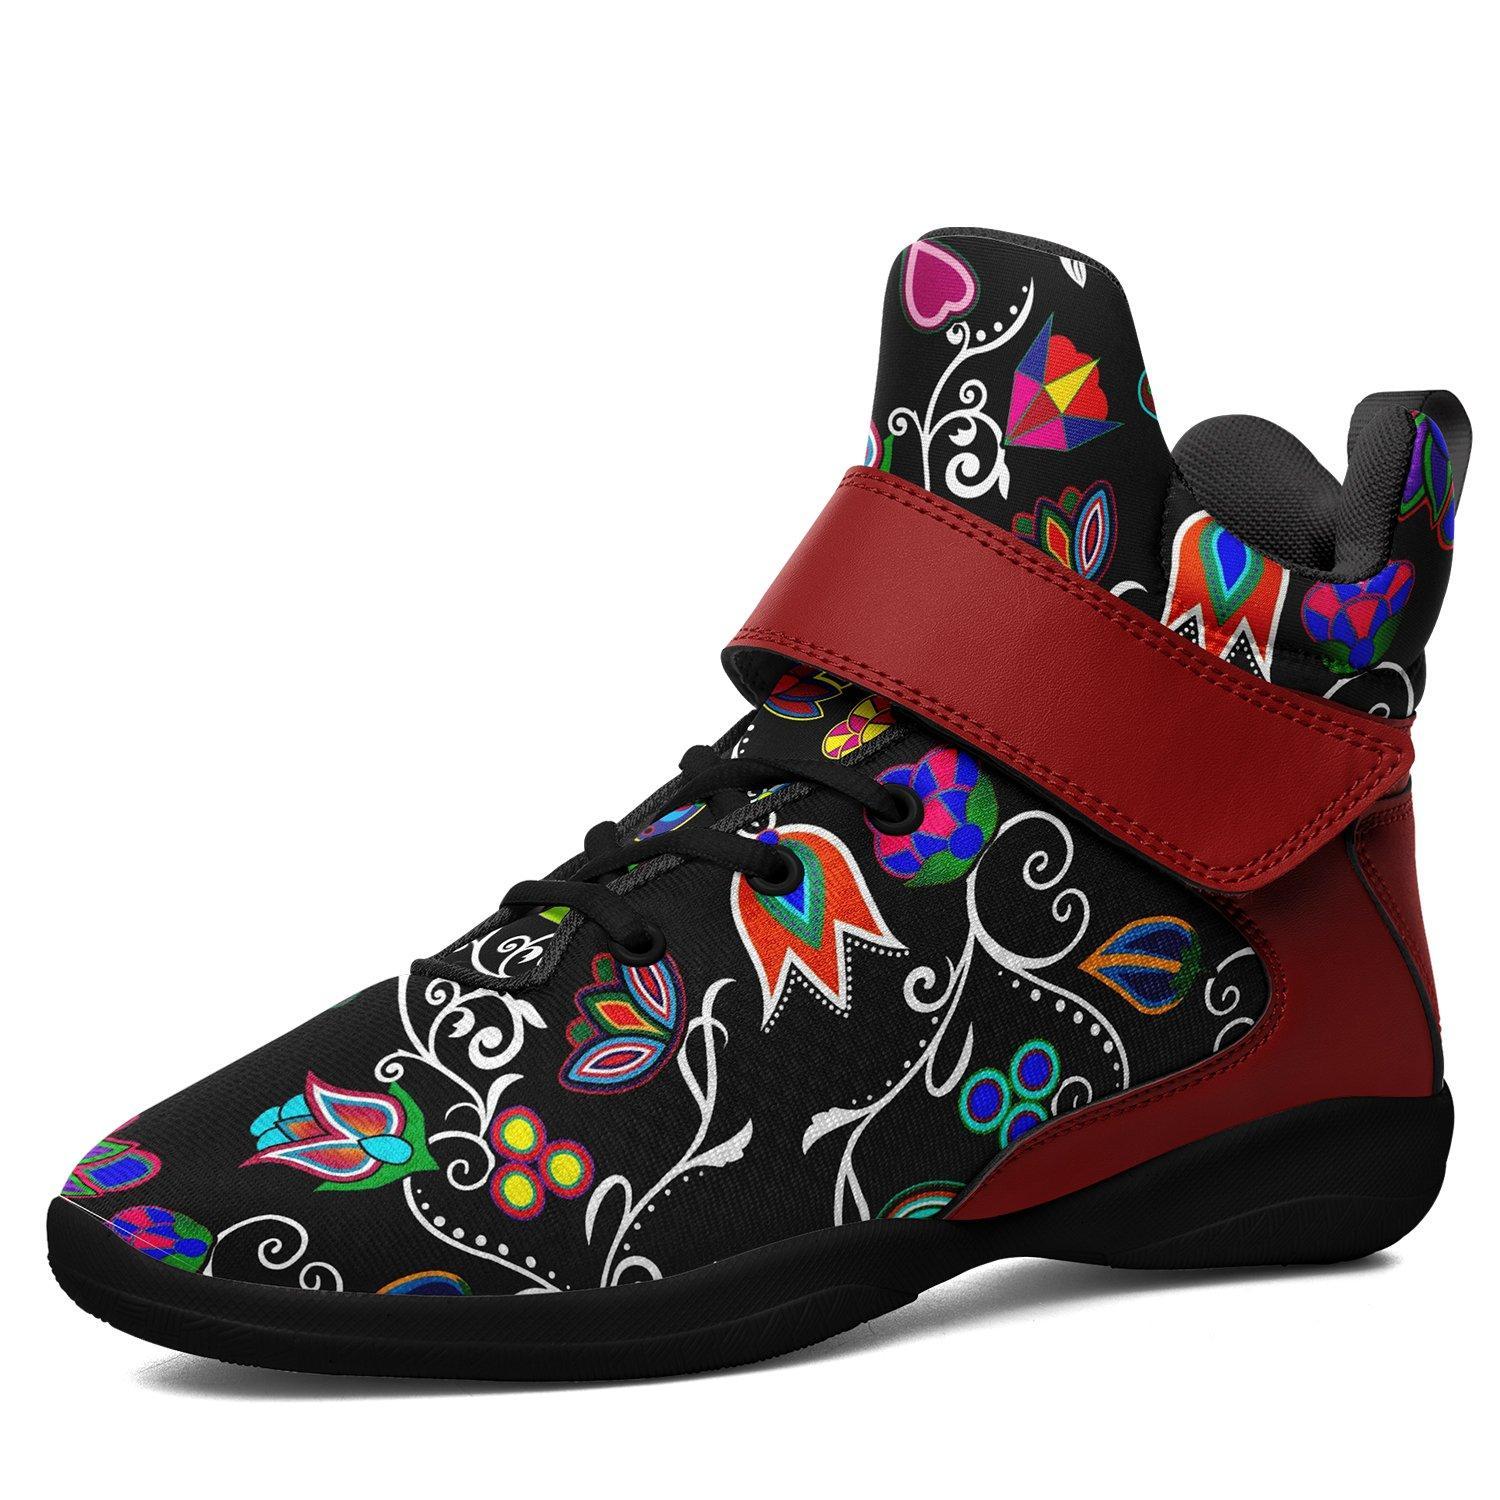 Indigenous Paisley Black Kid's Ipottaa Basketball / Sport High Top Shoes 49 Dzine US Child 12.5 / EUR 30 Black Sole with Dark Red Strap 